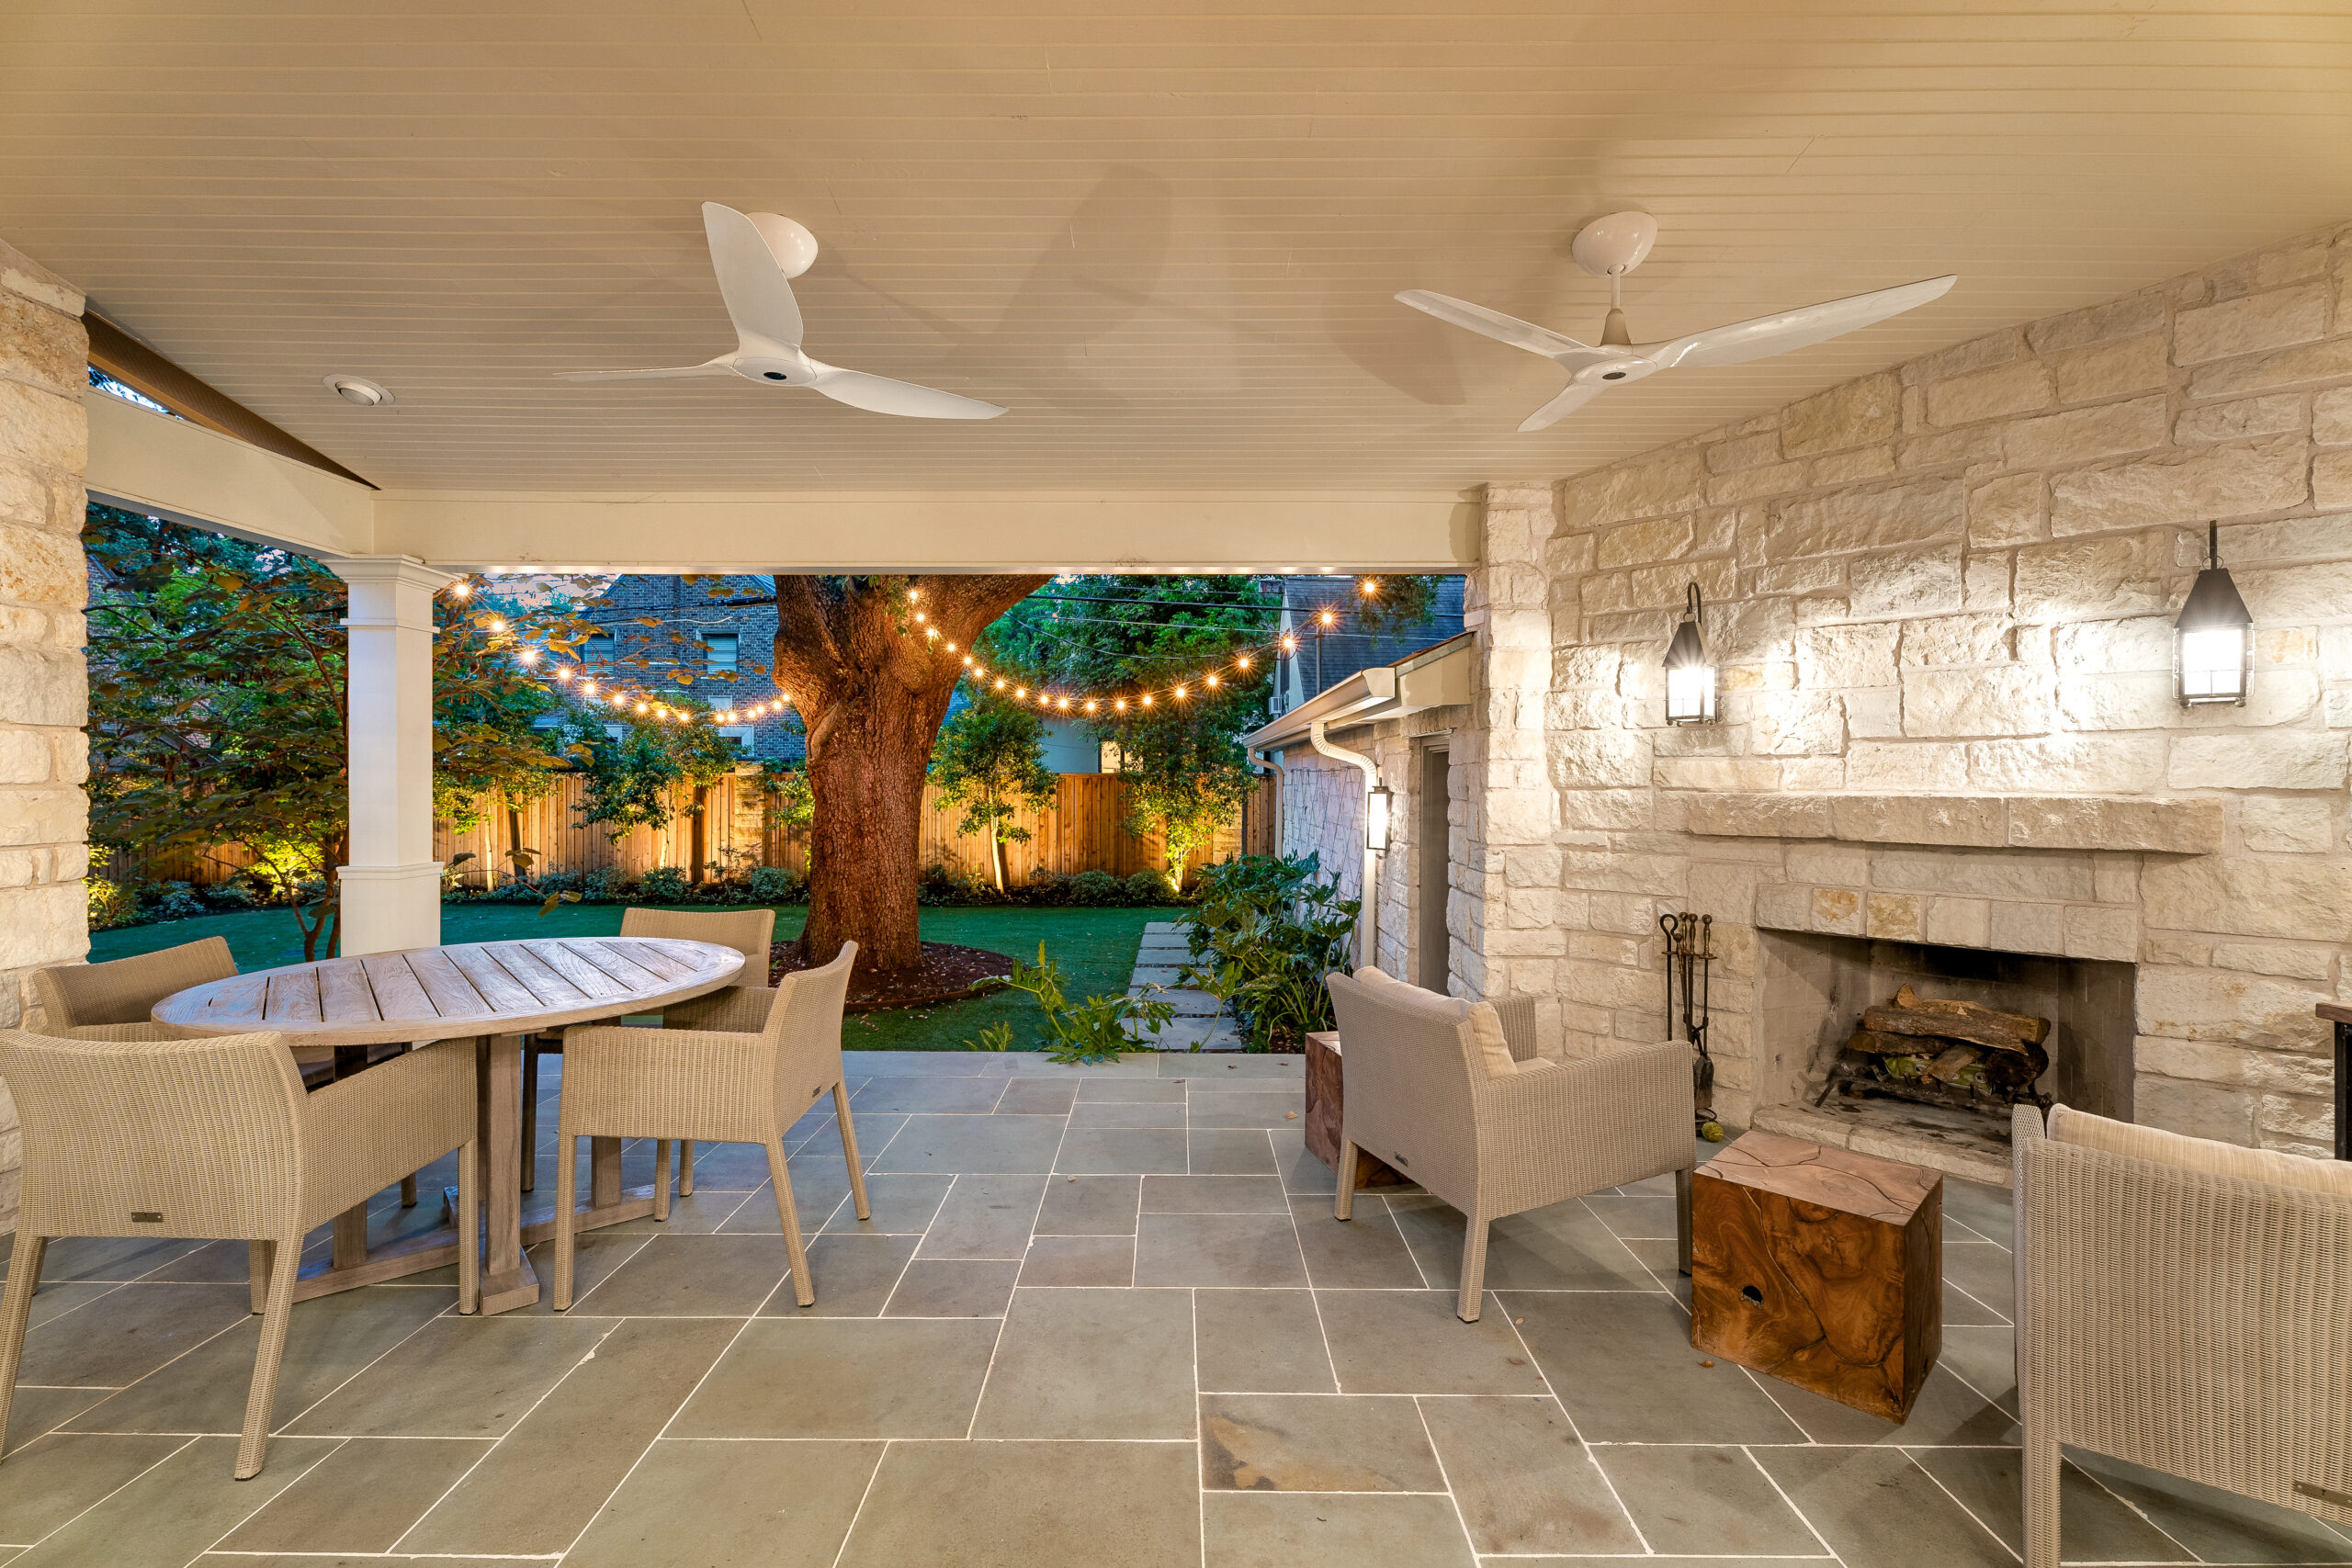 Outdoor terrace with ceiling fans and fireplace. 